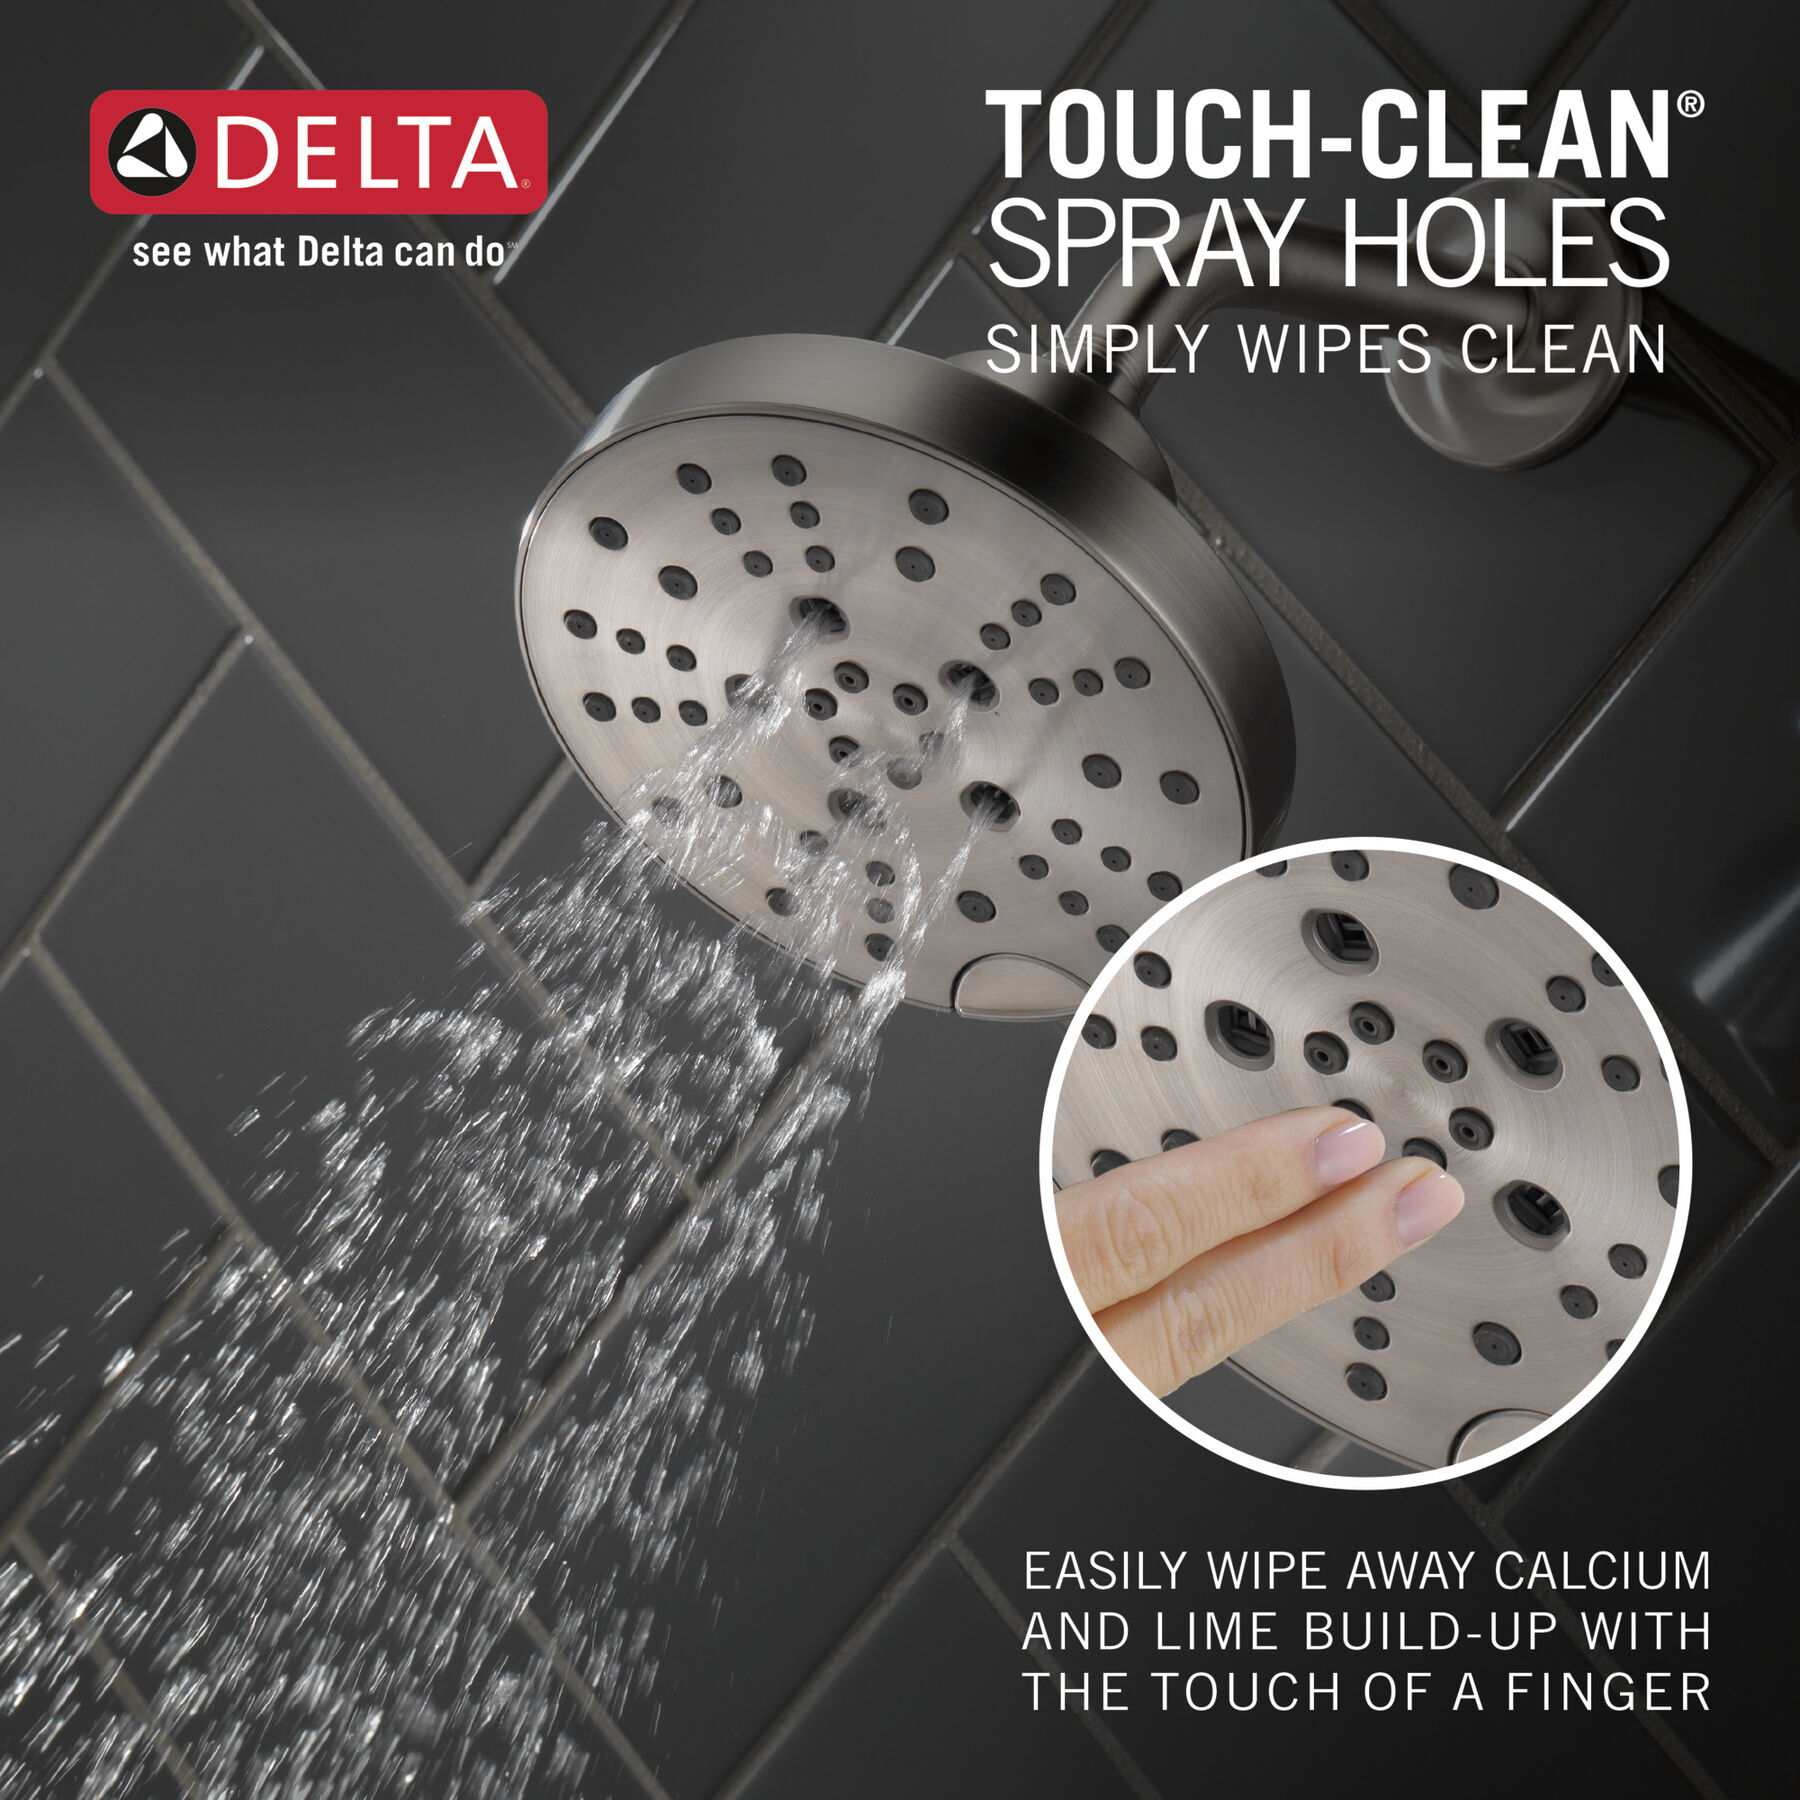 Shower Head Nozzle Cleaning Brush - Multifunctional Mini Cleaning